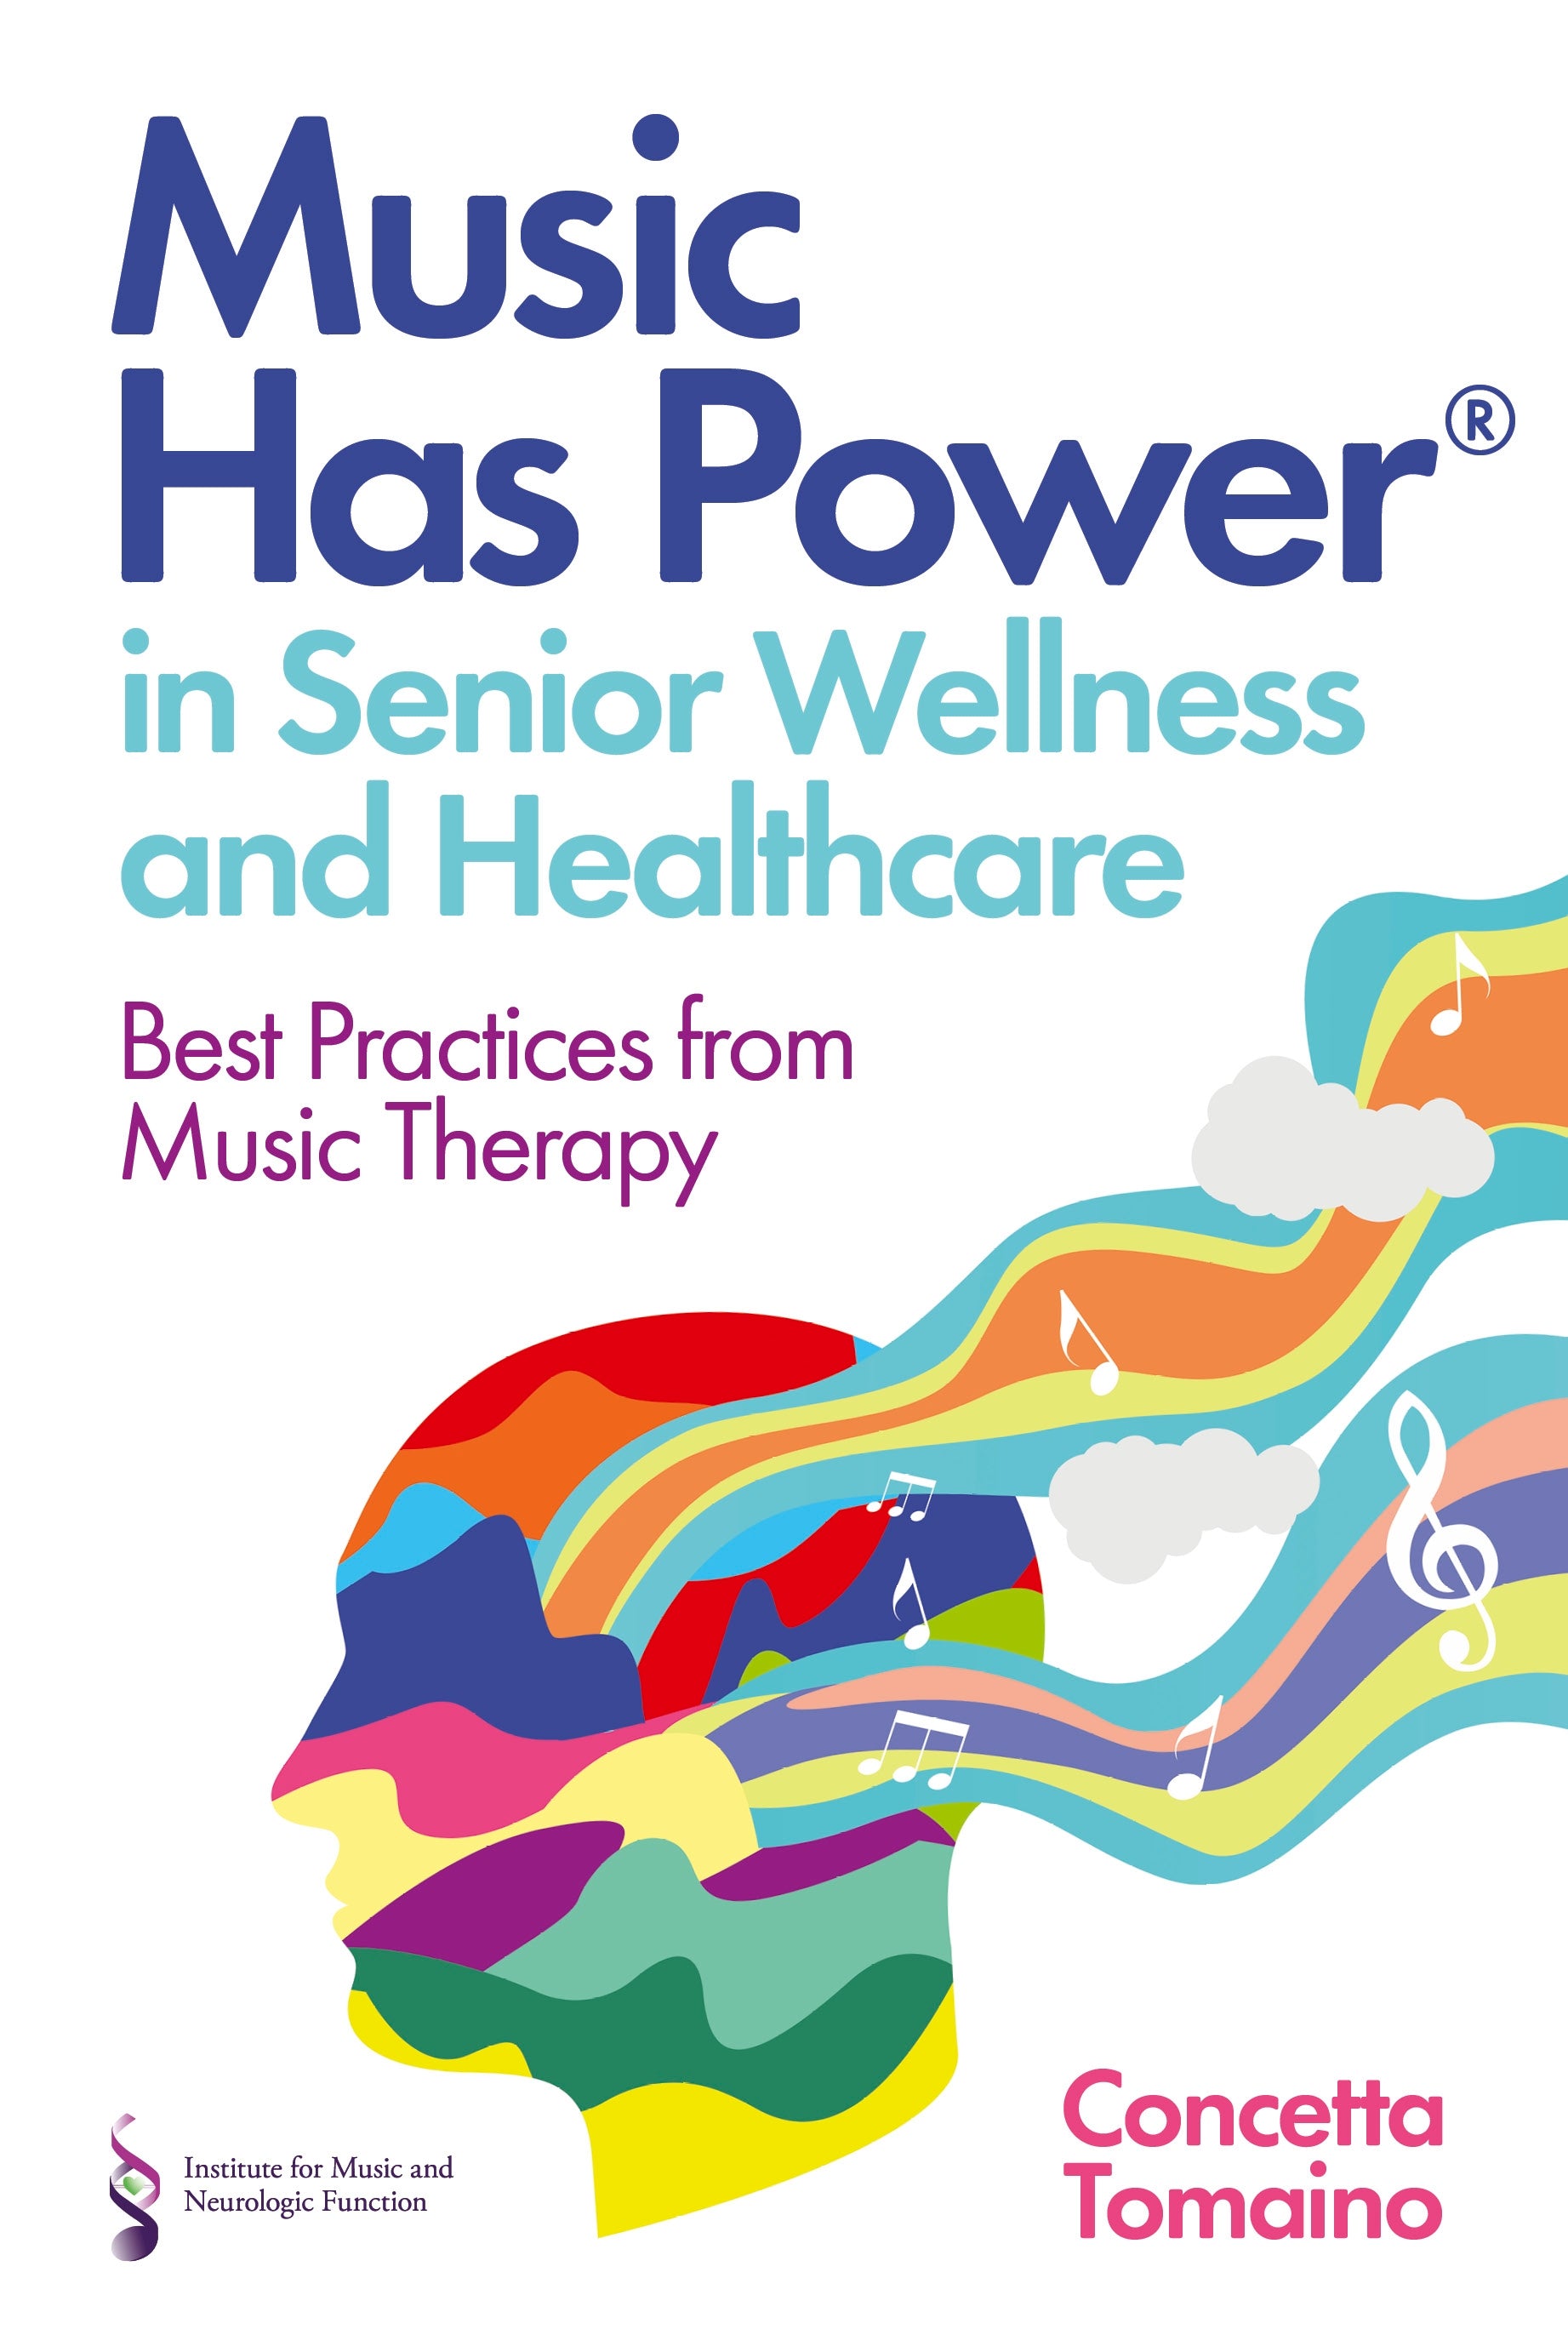 Music Has Power® in Senior Wellness and Healthcare by Concetta Tomaino